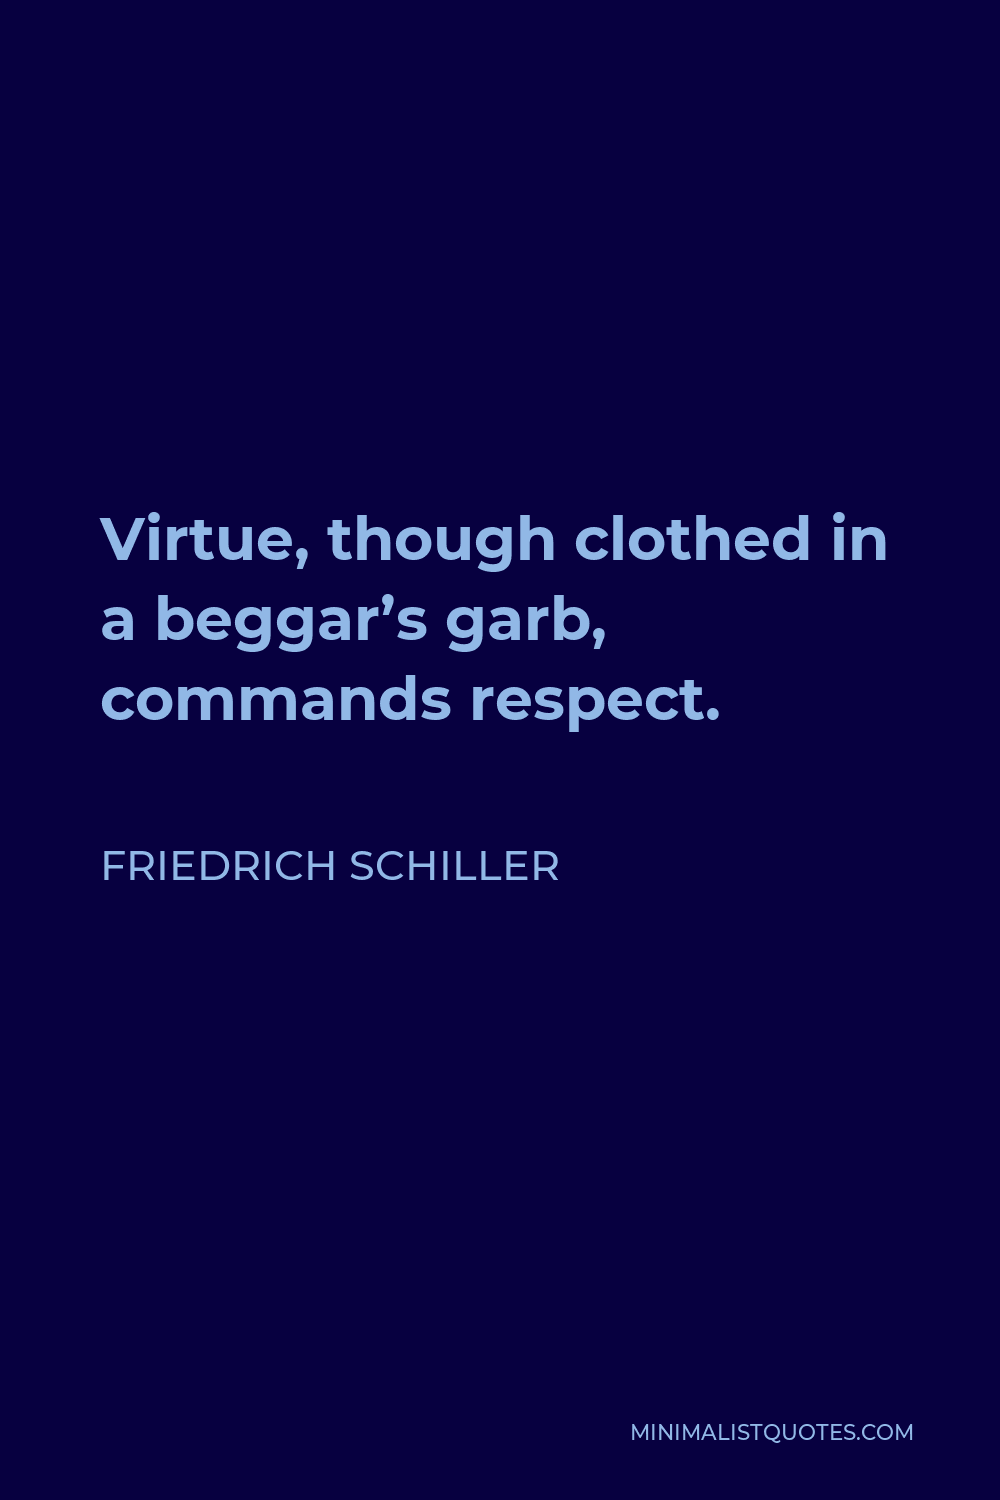 Friedrich Schiller Quote - Virtue, though clothed in a beggar’s garb, commands respect.